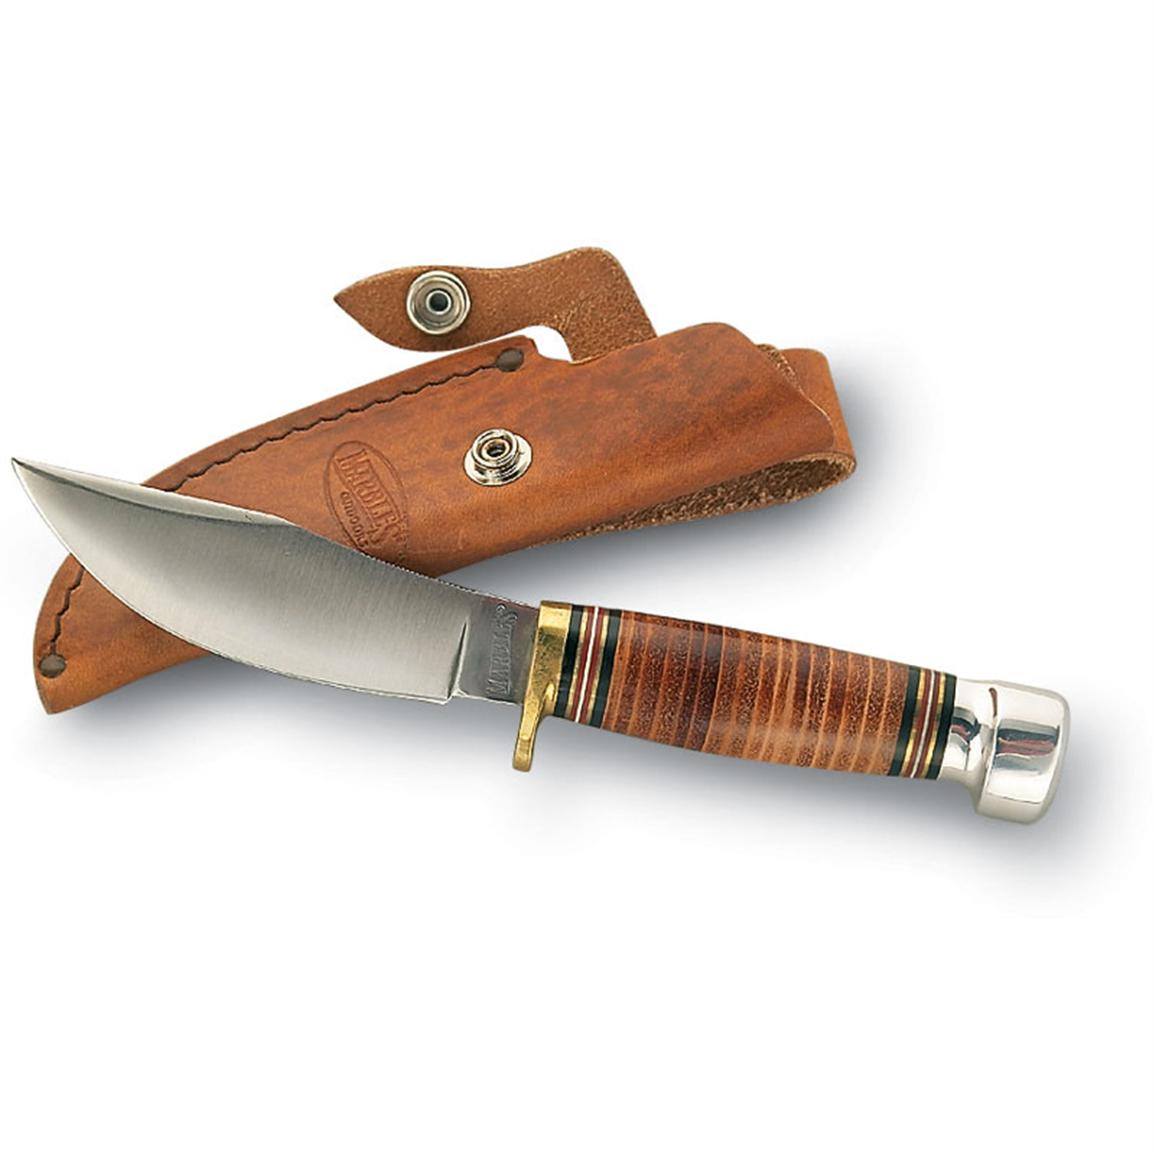 Marble s Woodcraft Sheath Knife - 88389 at Sportsman s Guide